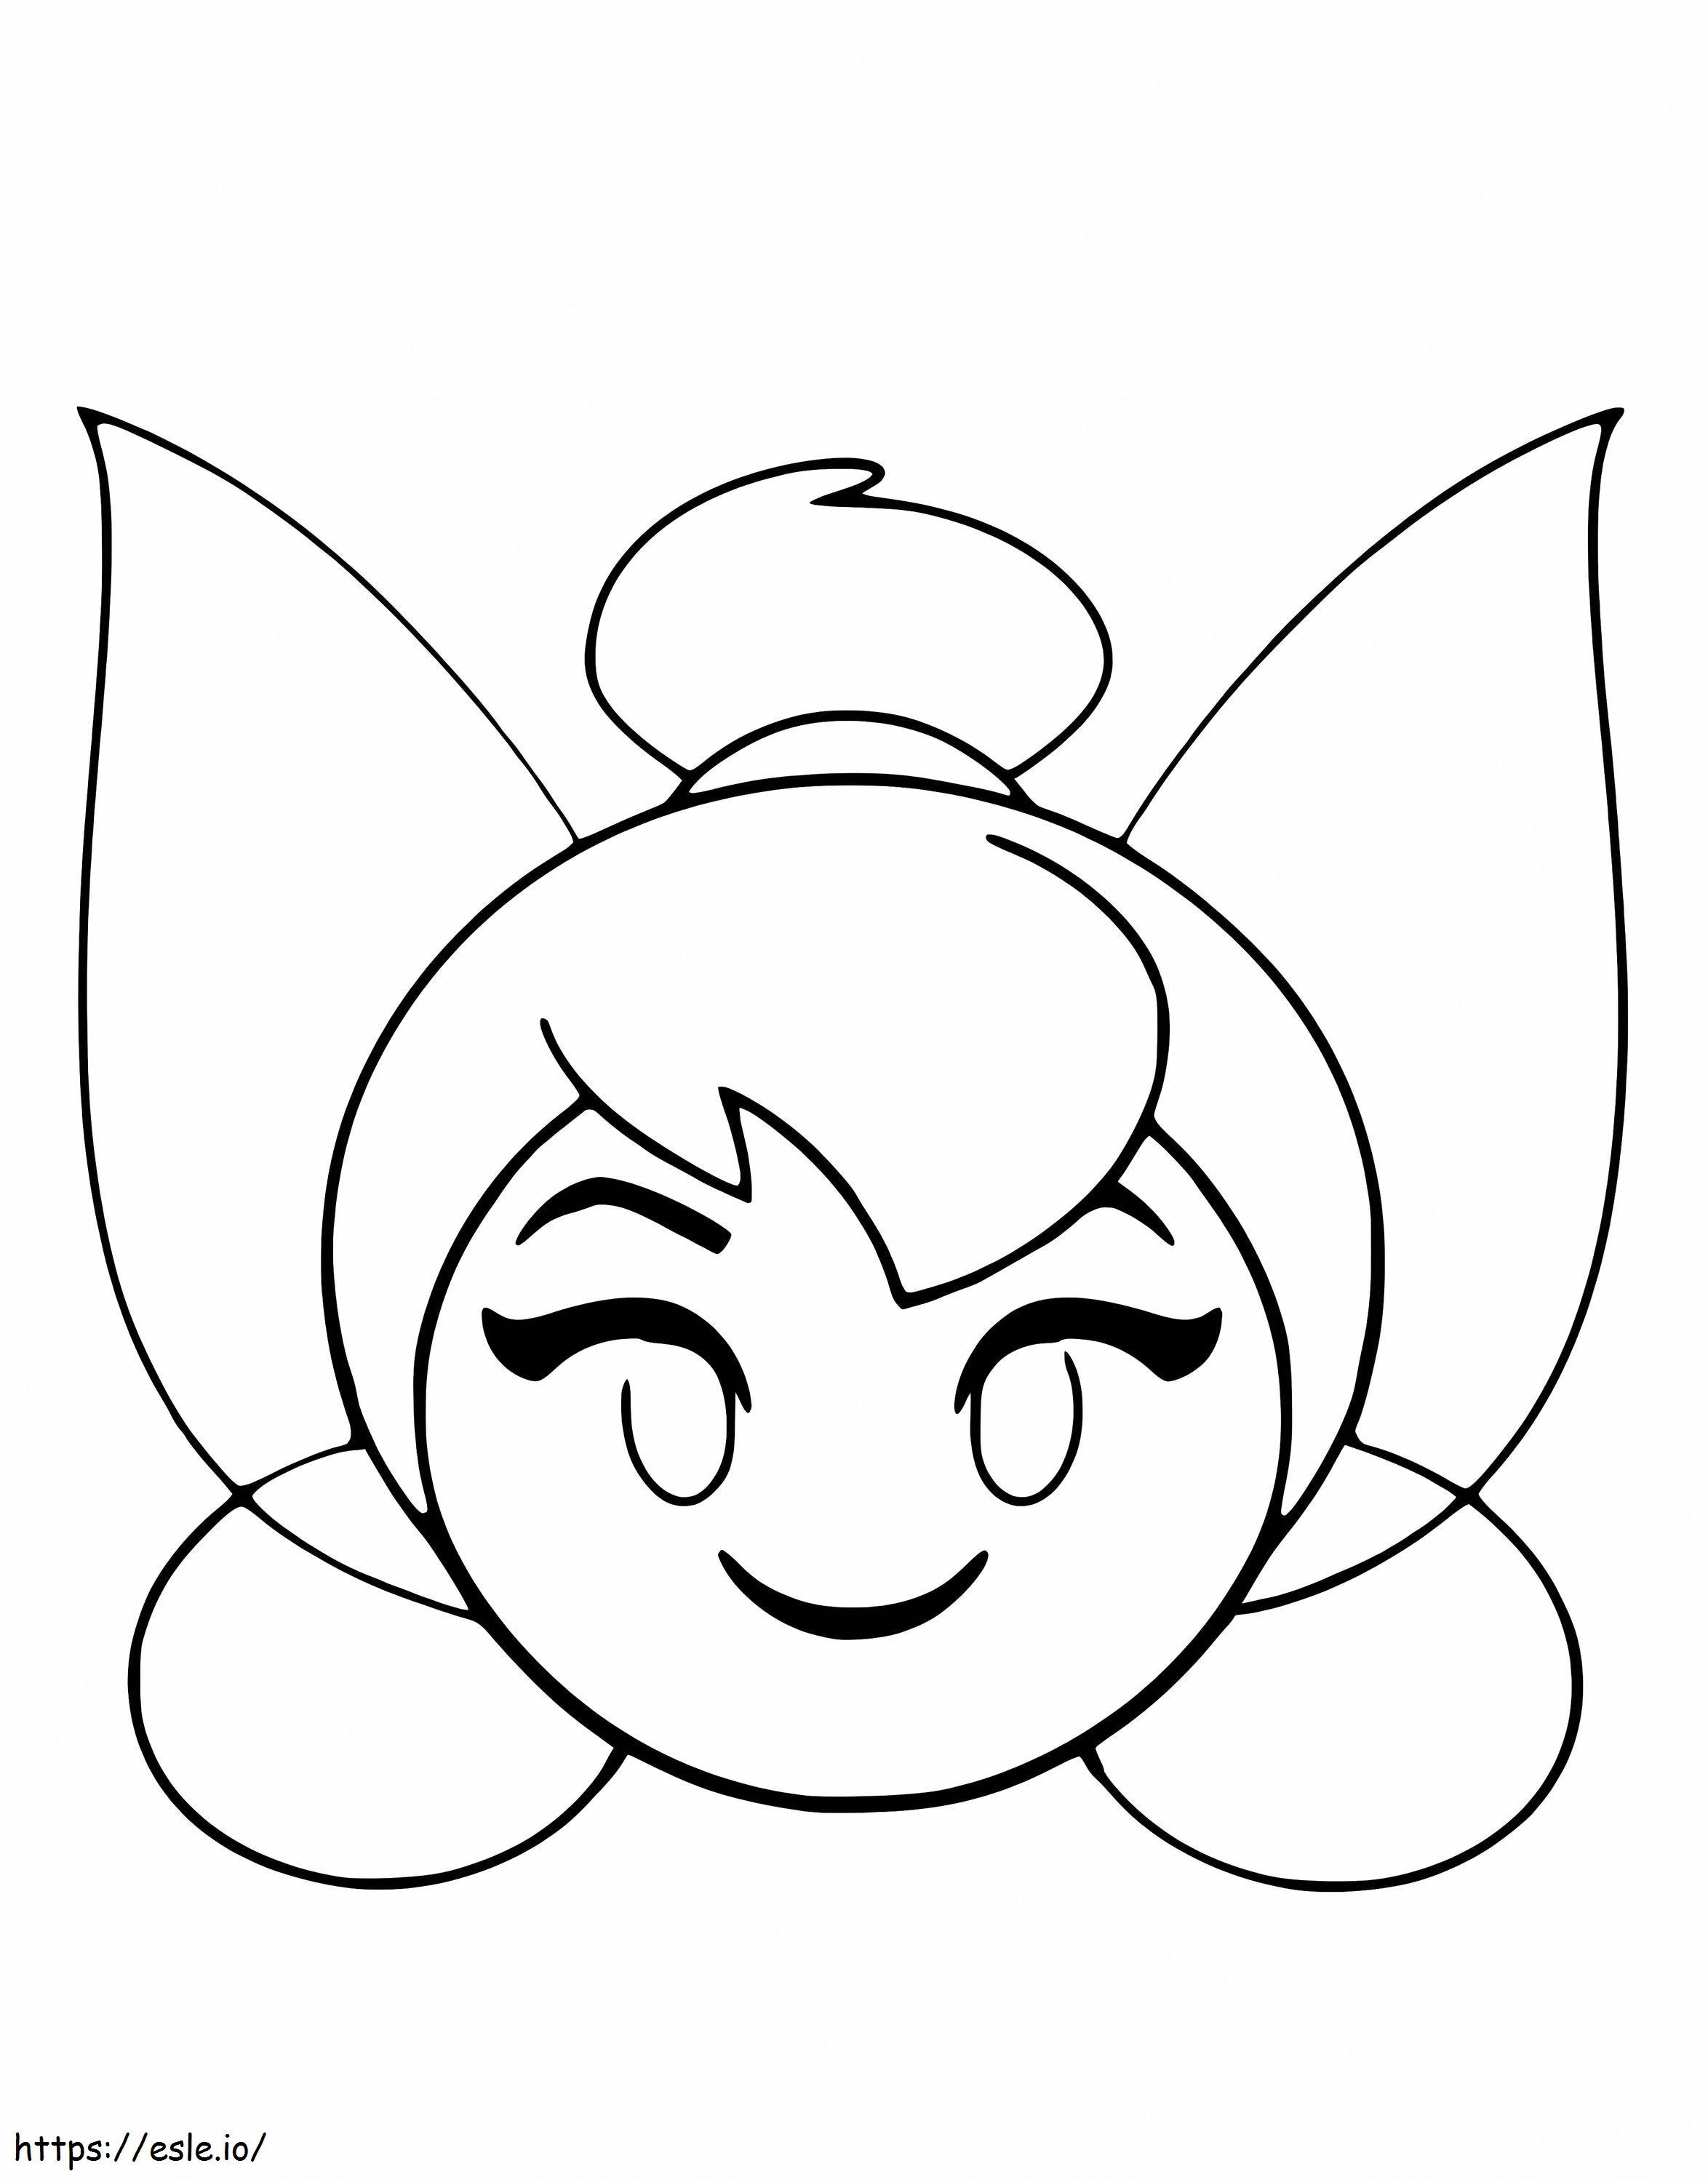 Fairy Emoticons coloring page